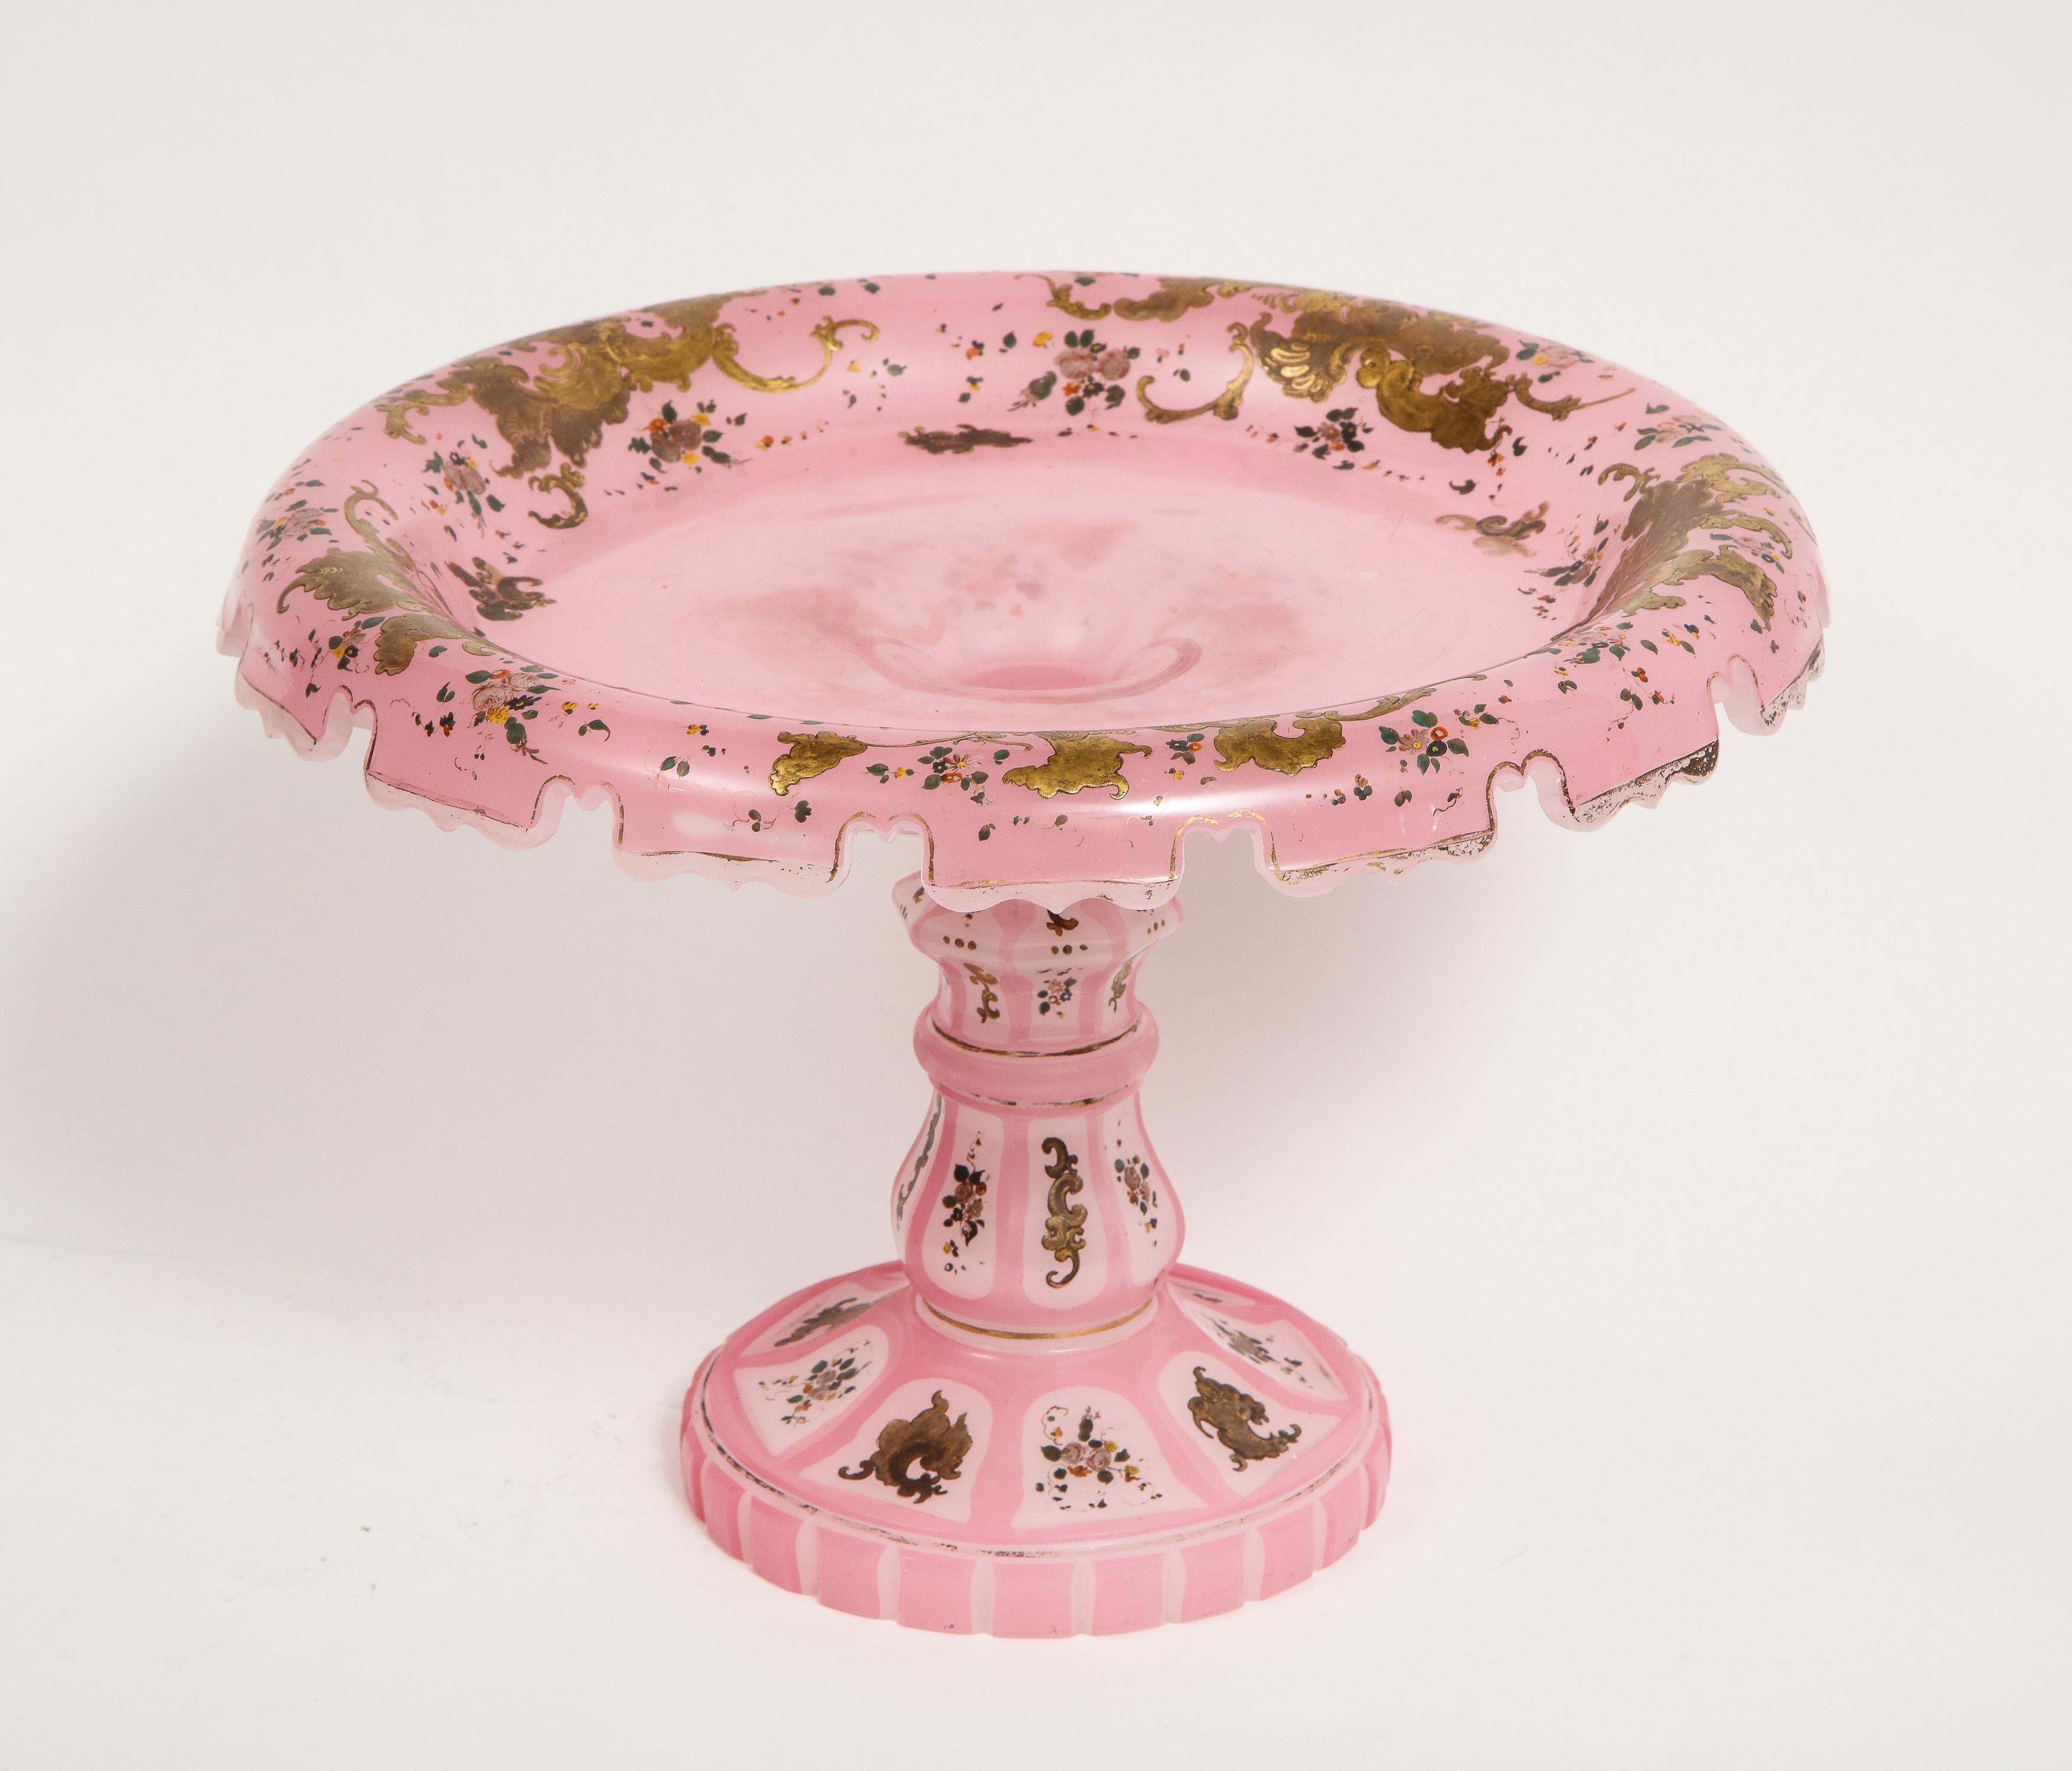 Exceptional Quality Pink Triple Overlay Enameled Bohemian Glass Cake Stand 7